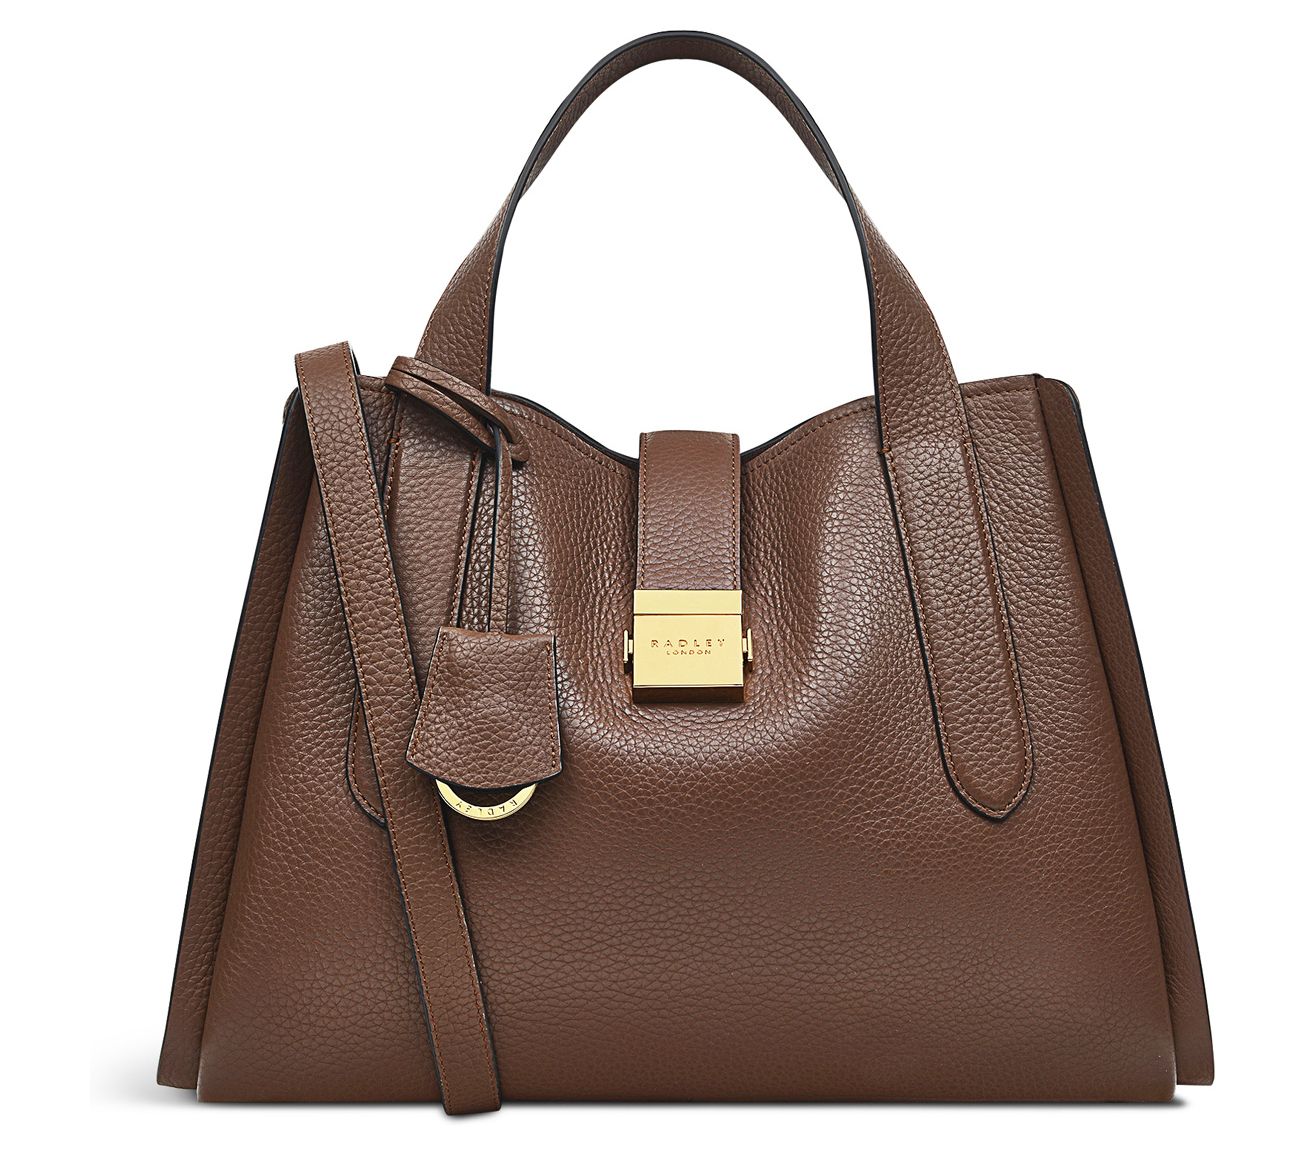 Radley bag REVIEW - My honest thoughts as a handbag collector! - Fashion  For Lunch.